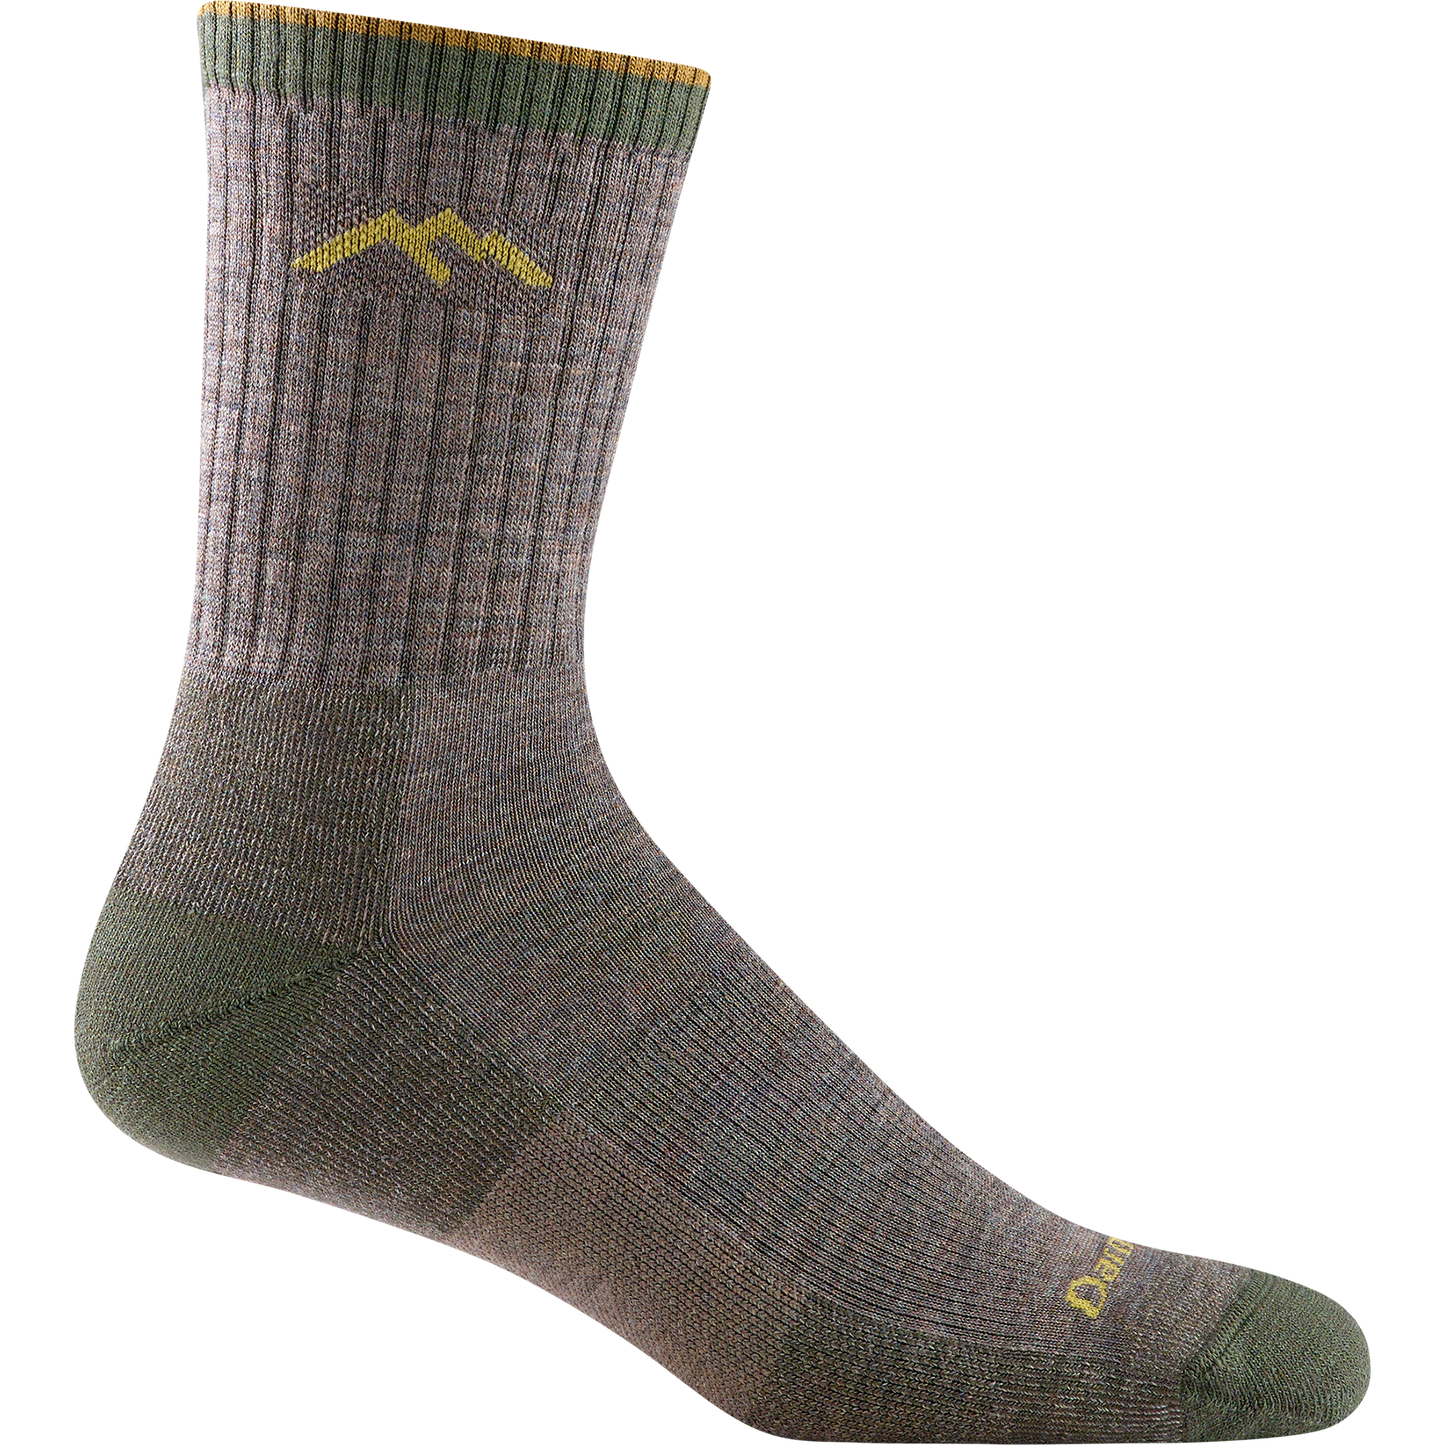 Darn tough taupe sock with yellow mountain outline detail, green toe and heel